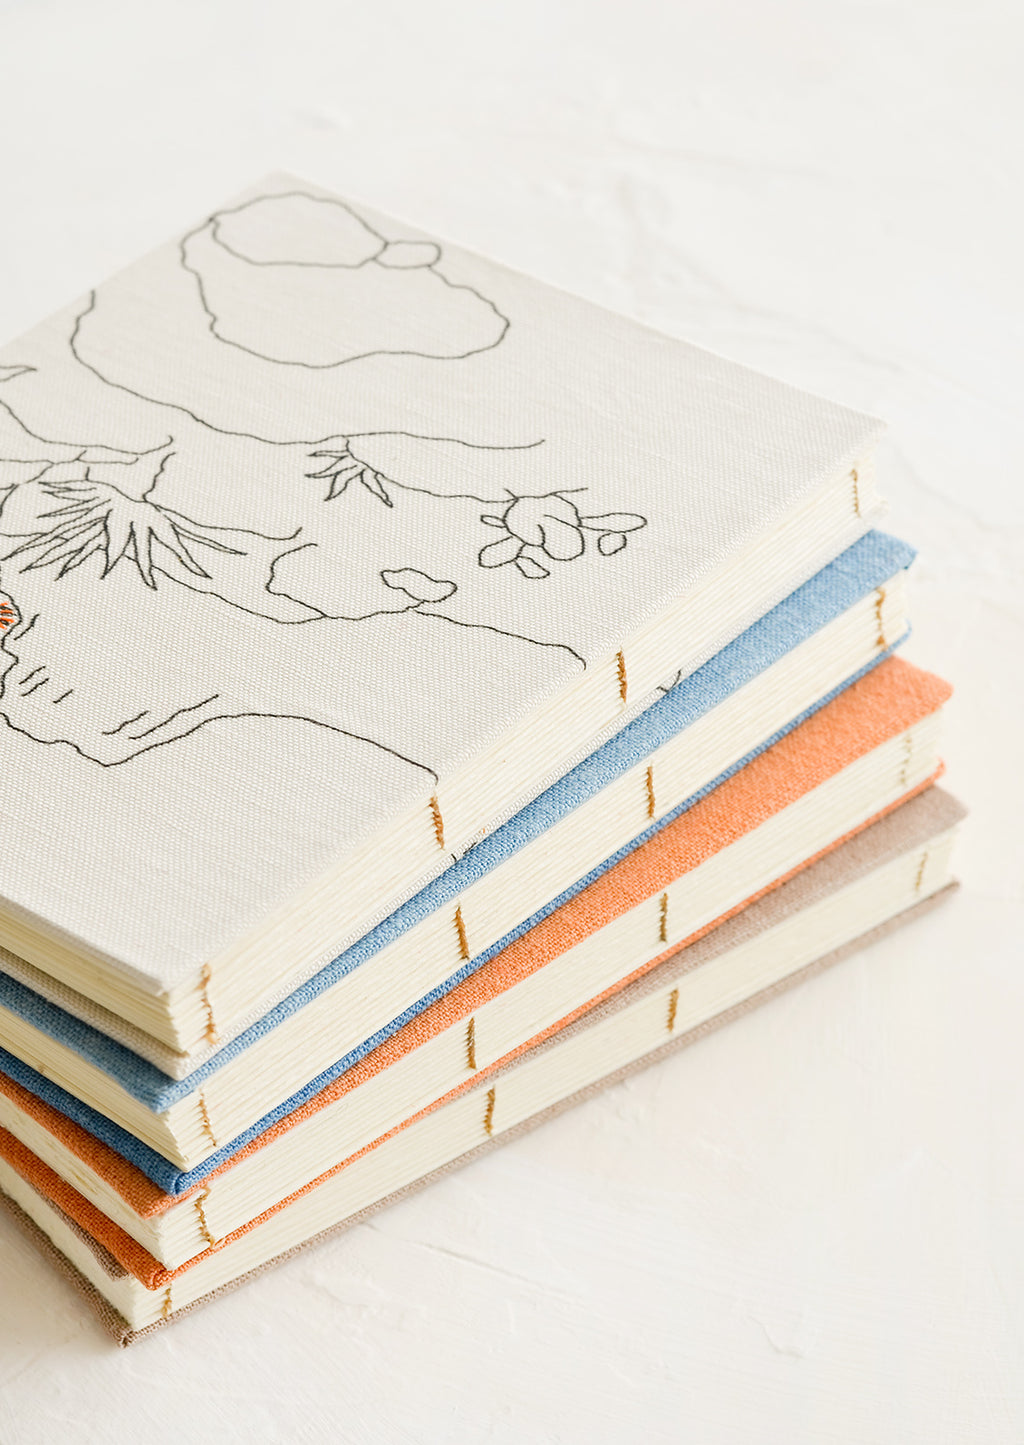 4: A stack of cloth journals with hand-bound seams.